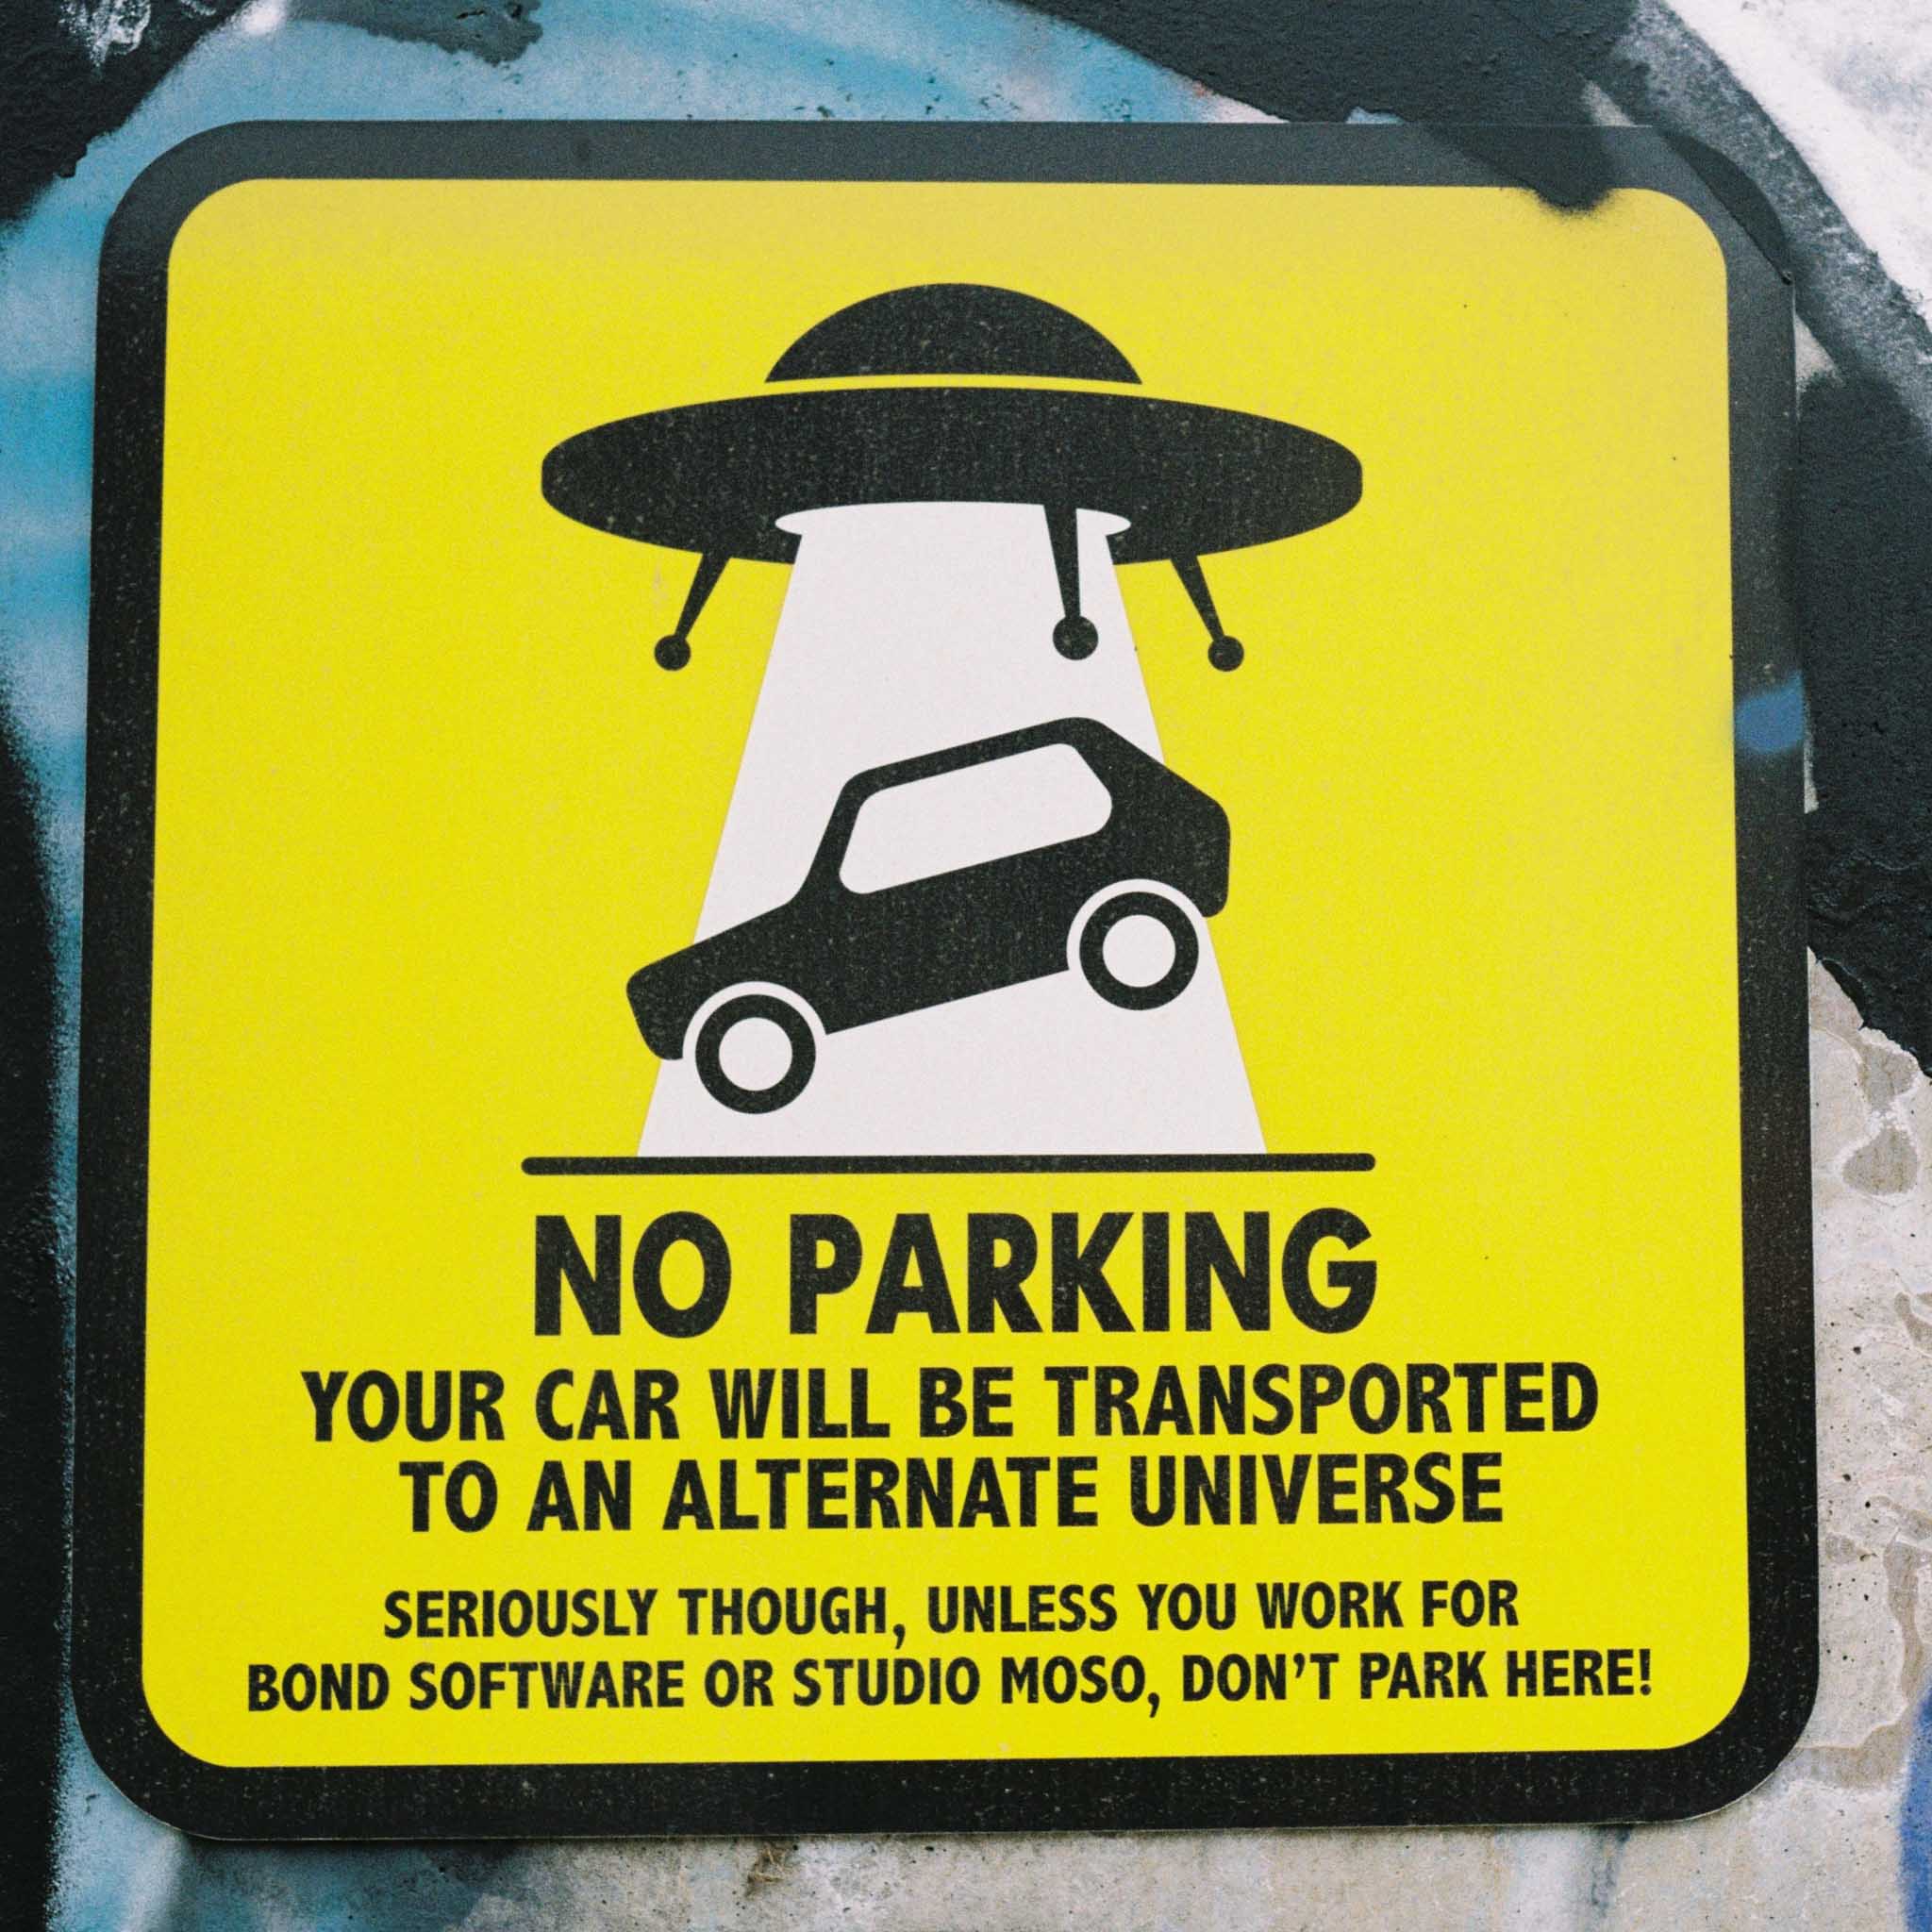 An amusing “no parking” sign that threatens to transport your car to another universe. Collingwood, Melbourne